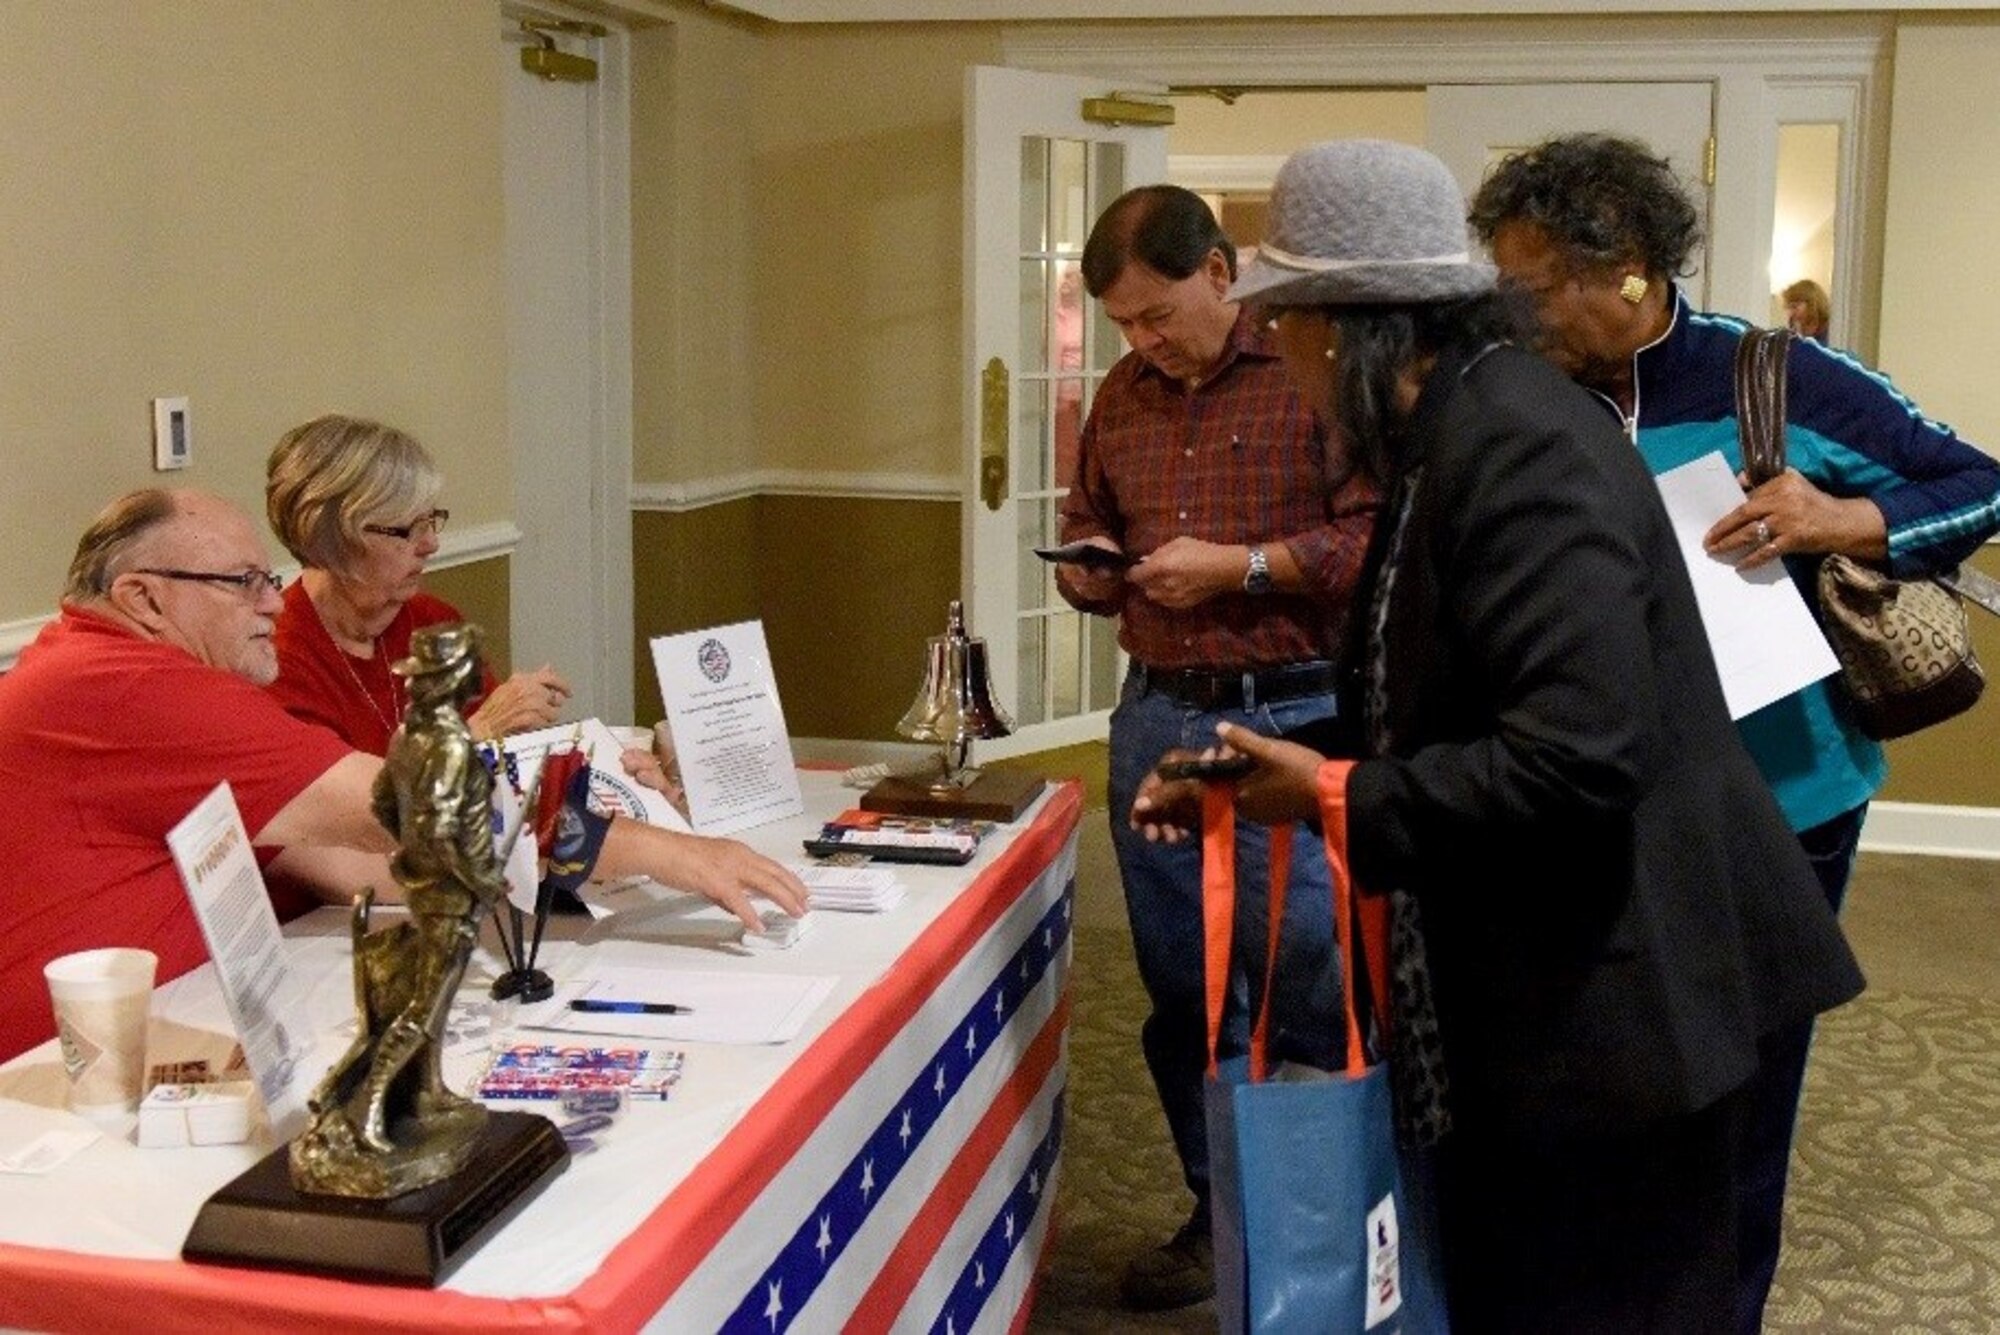 Retired service members visit various information booths during the second annual Retiree Appreciation Night event, Nov. 10, 2016, at Seymour Johnson Air Force Base, North Carolina.  The event was held in appreciation for retirees’ service to the country in conjunction with Veterans Day and to distribute information about base services available to them.  (U.S. Air Force photo by Airman Miranda A. Loera)